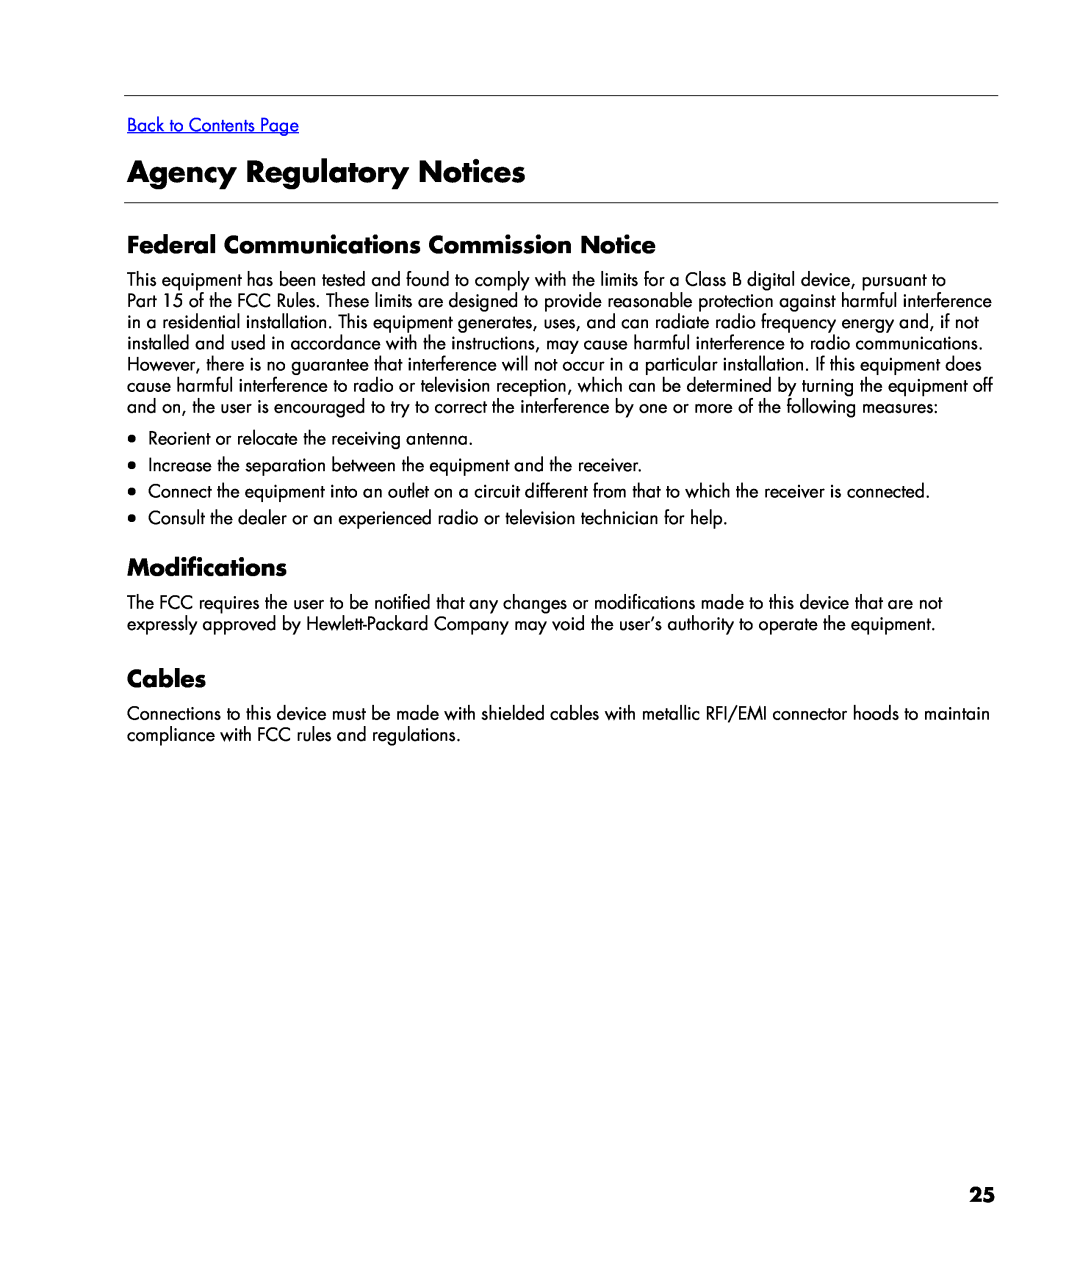 HP w20 Agency Regulatory Notices, Federal Communications Commission Notice, Modifications, Cables, Back to Contents Page 